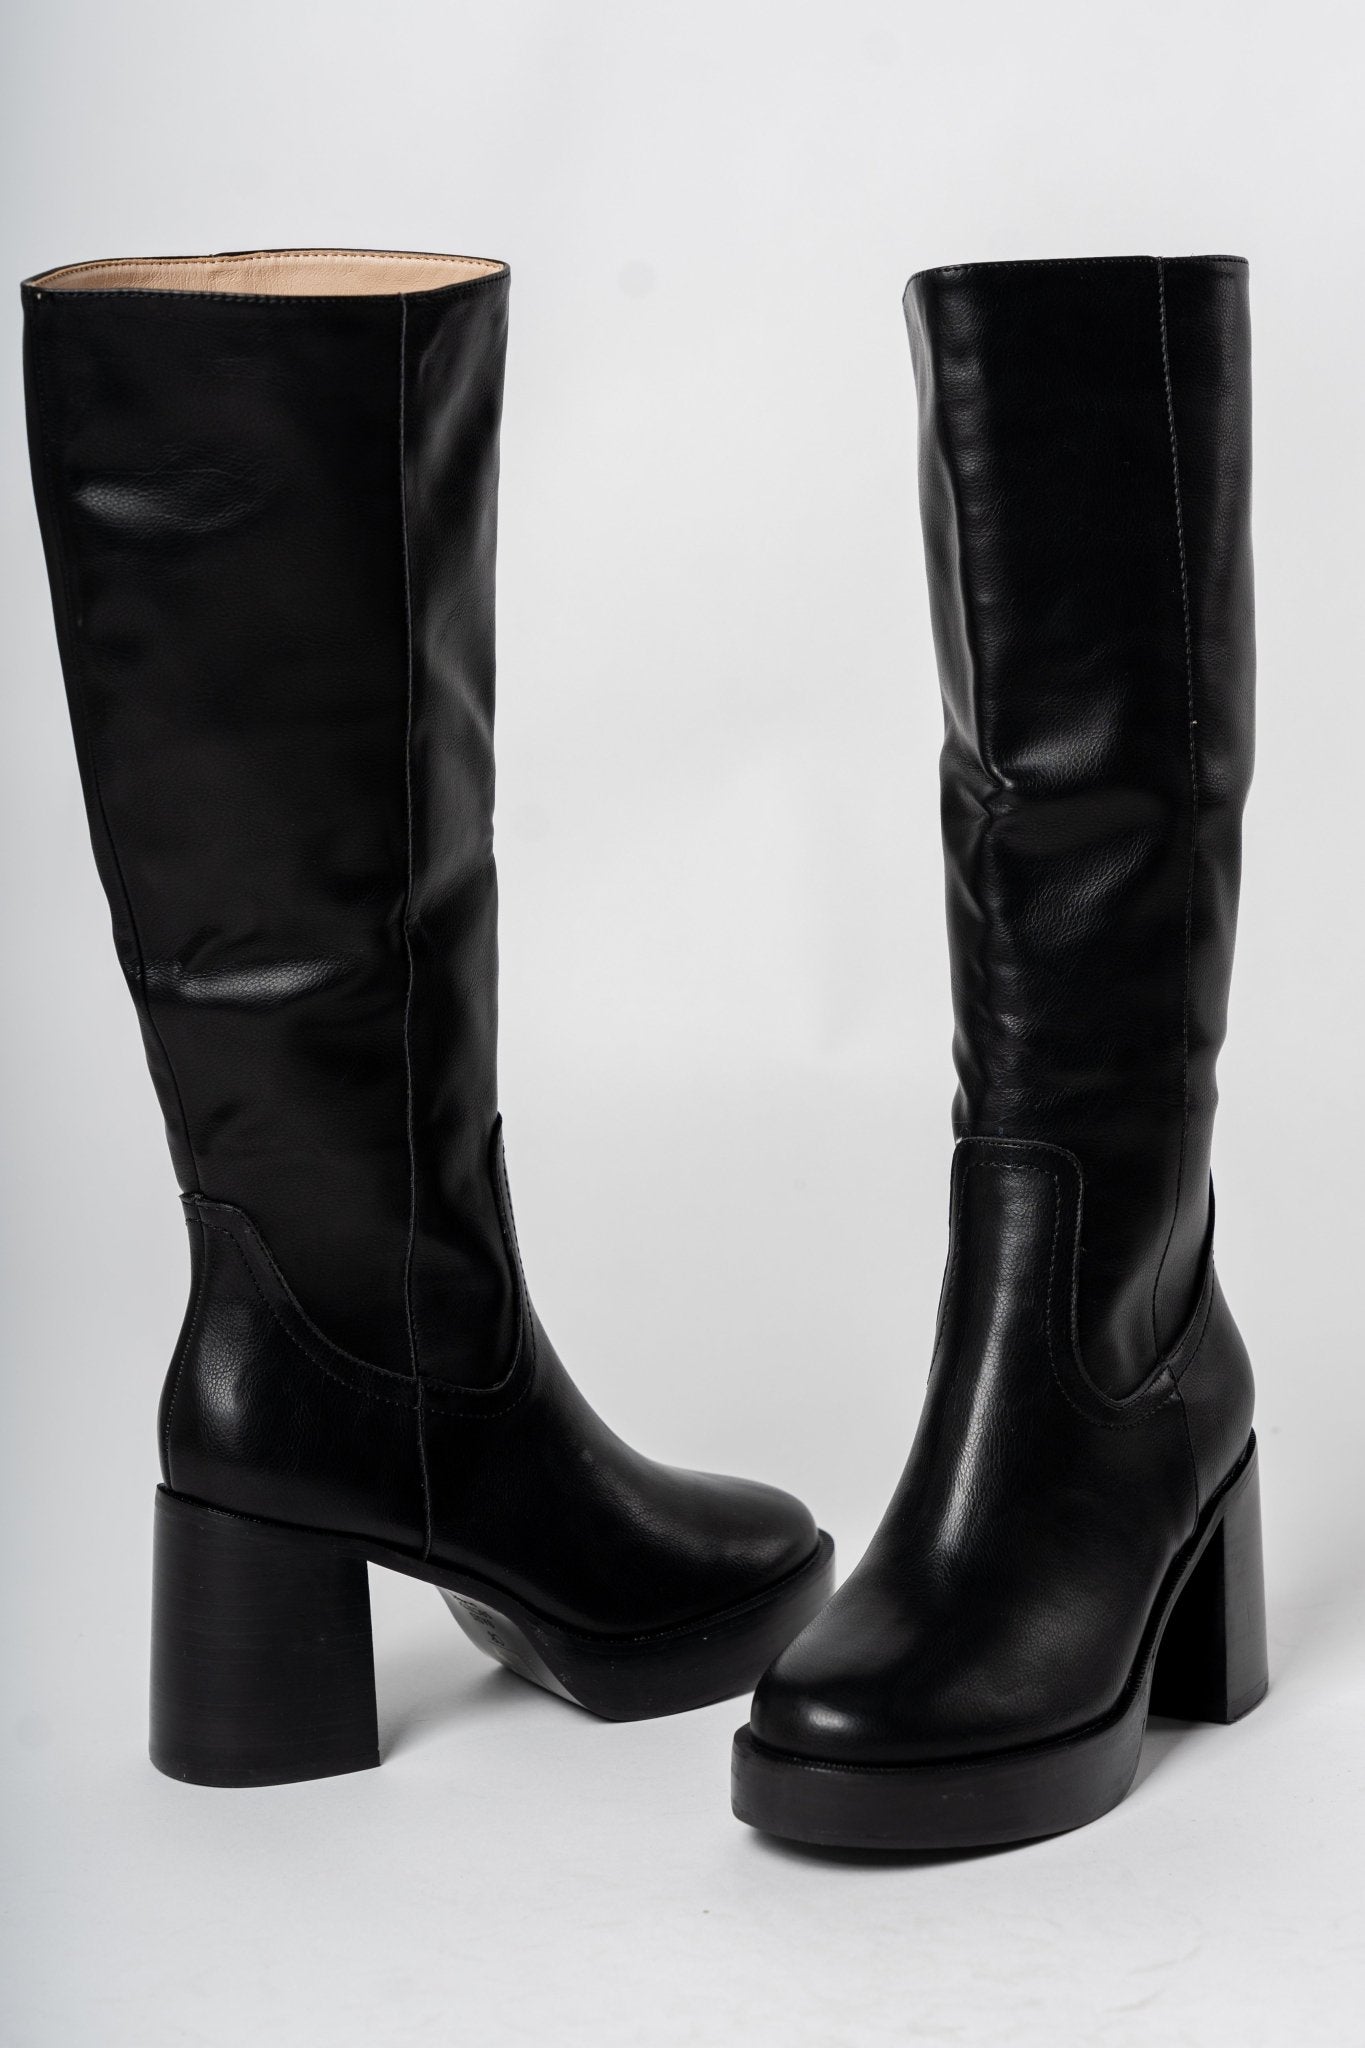 Juniper platform knee high boot black Stylish shoes - Womens Fashion Shoes at Lush Fashion Lounge Boutique in Oklahoma City